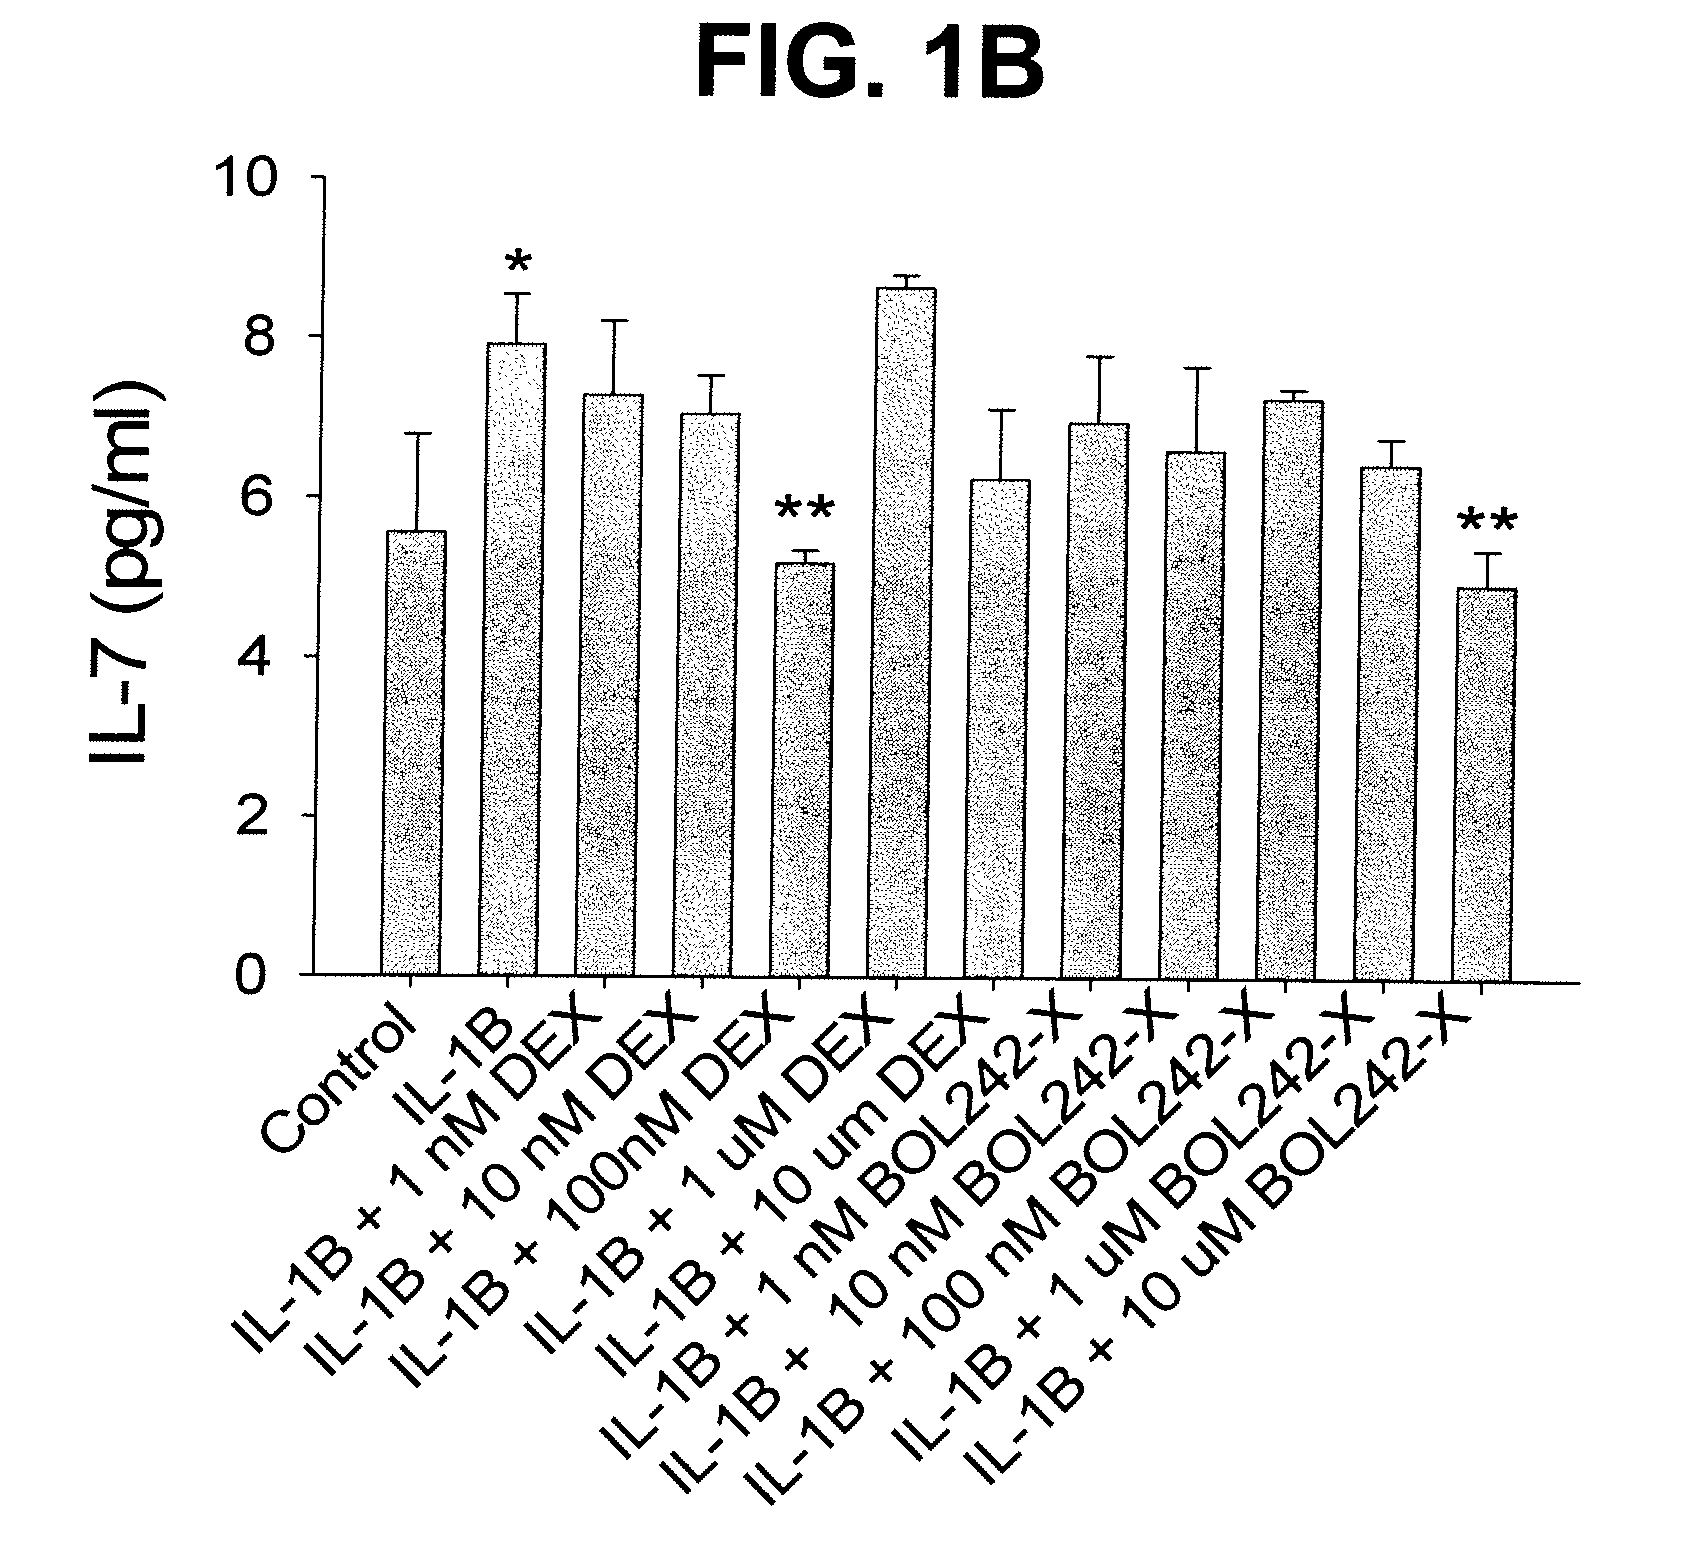 Compositions and Methods for Treating or Controlling Anterior-Segment Inflammation